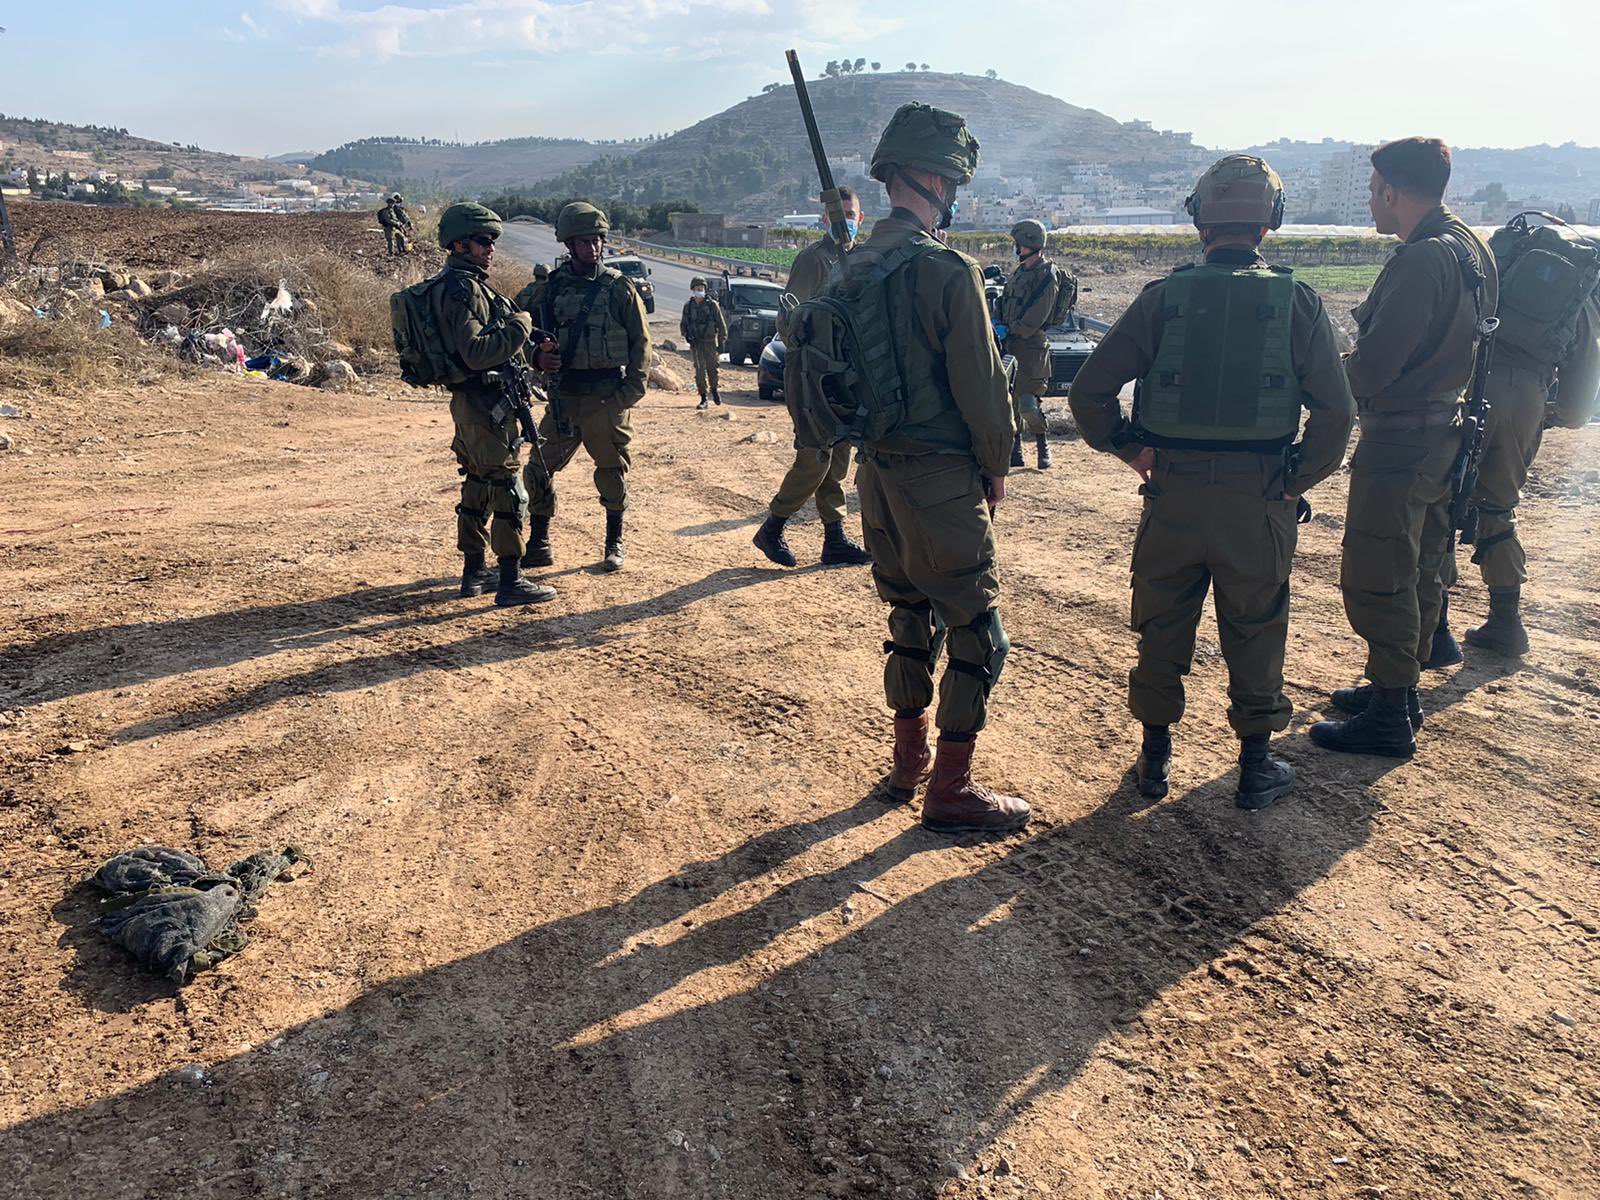 IDF troops neutralize assailant following attempted stabbing attack